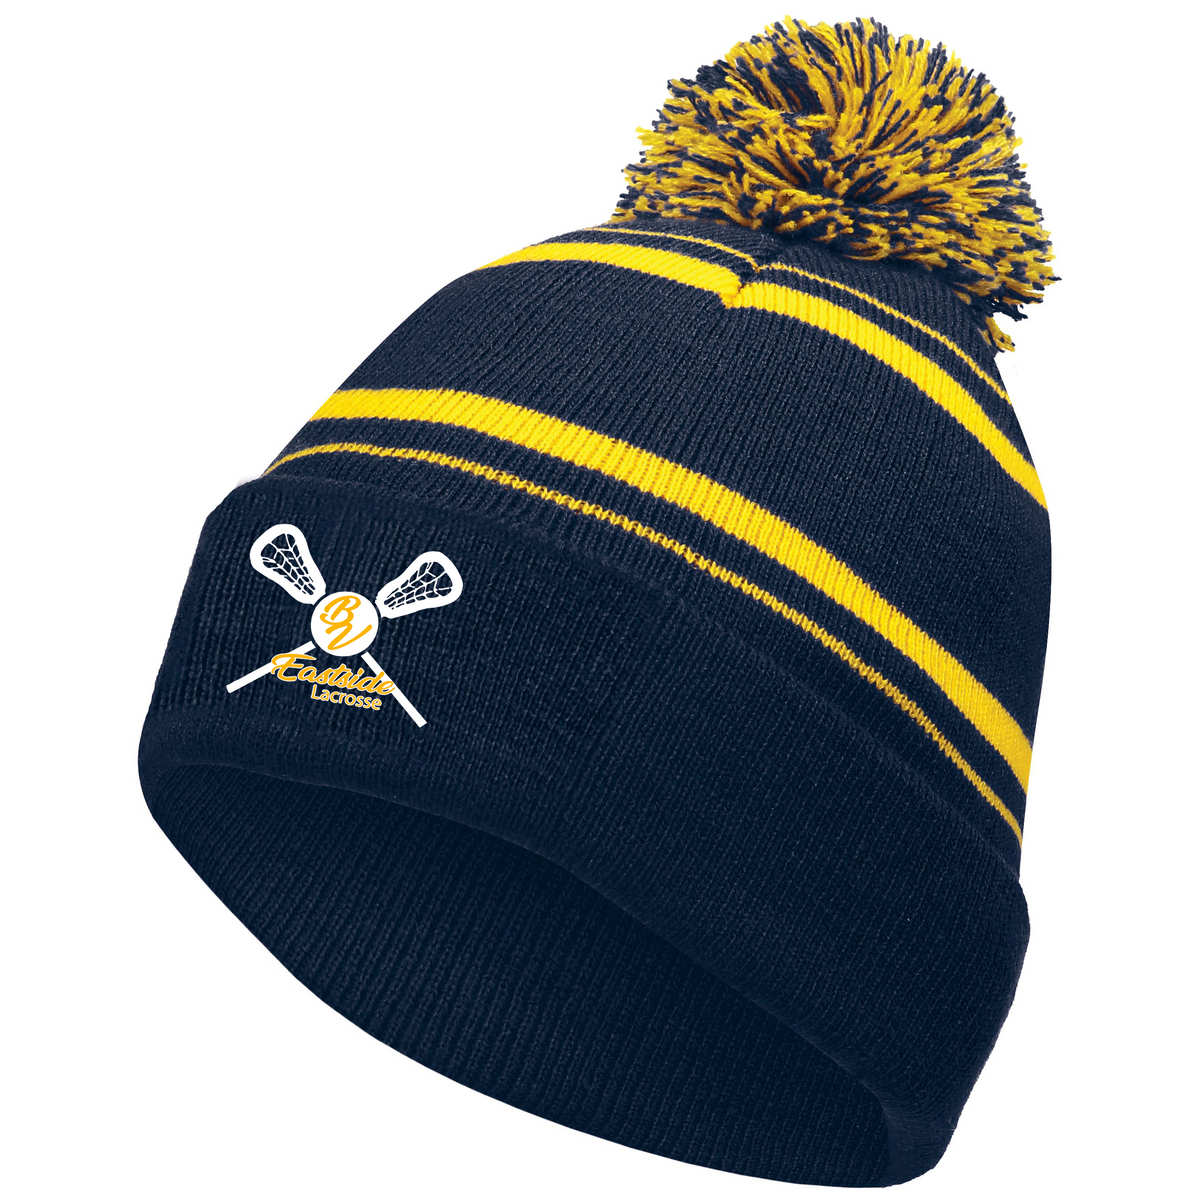 BV Eastside Lacrosse Homecoming Beanie- Embroidered